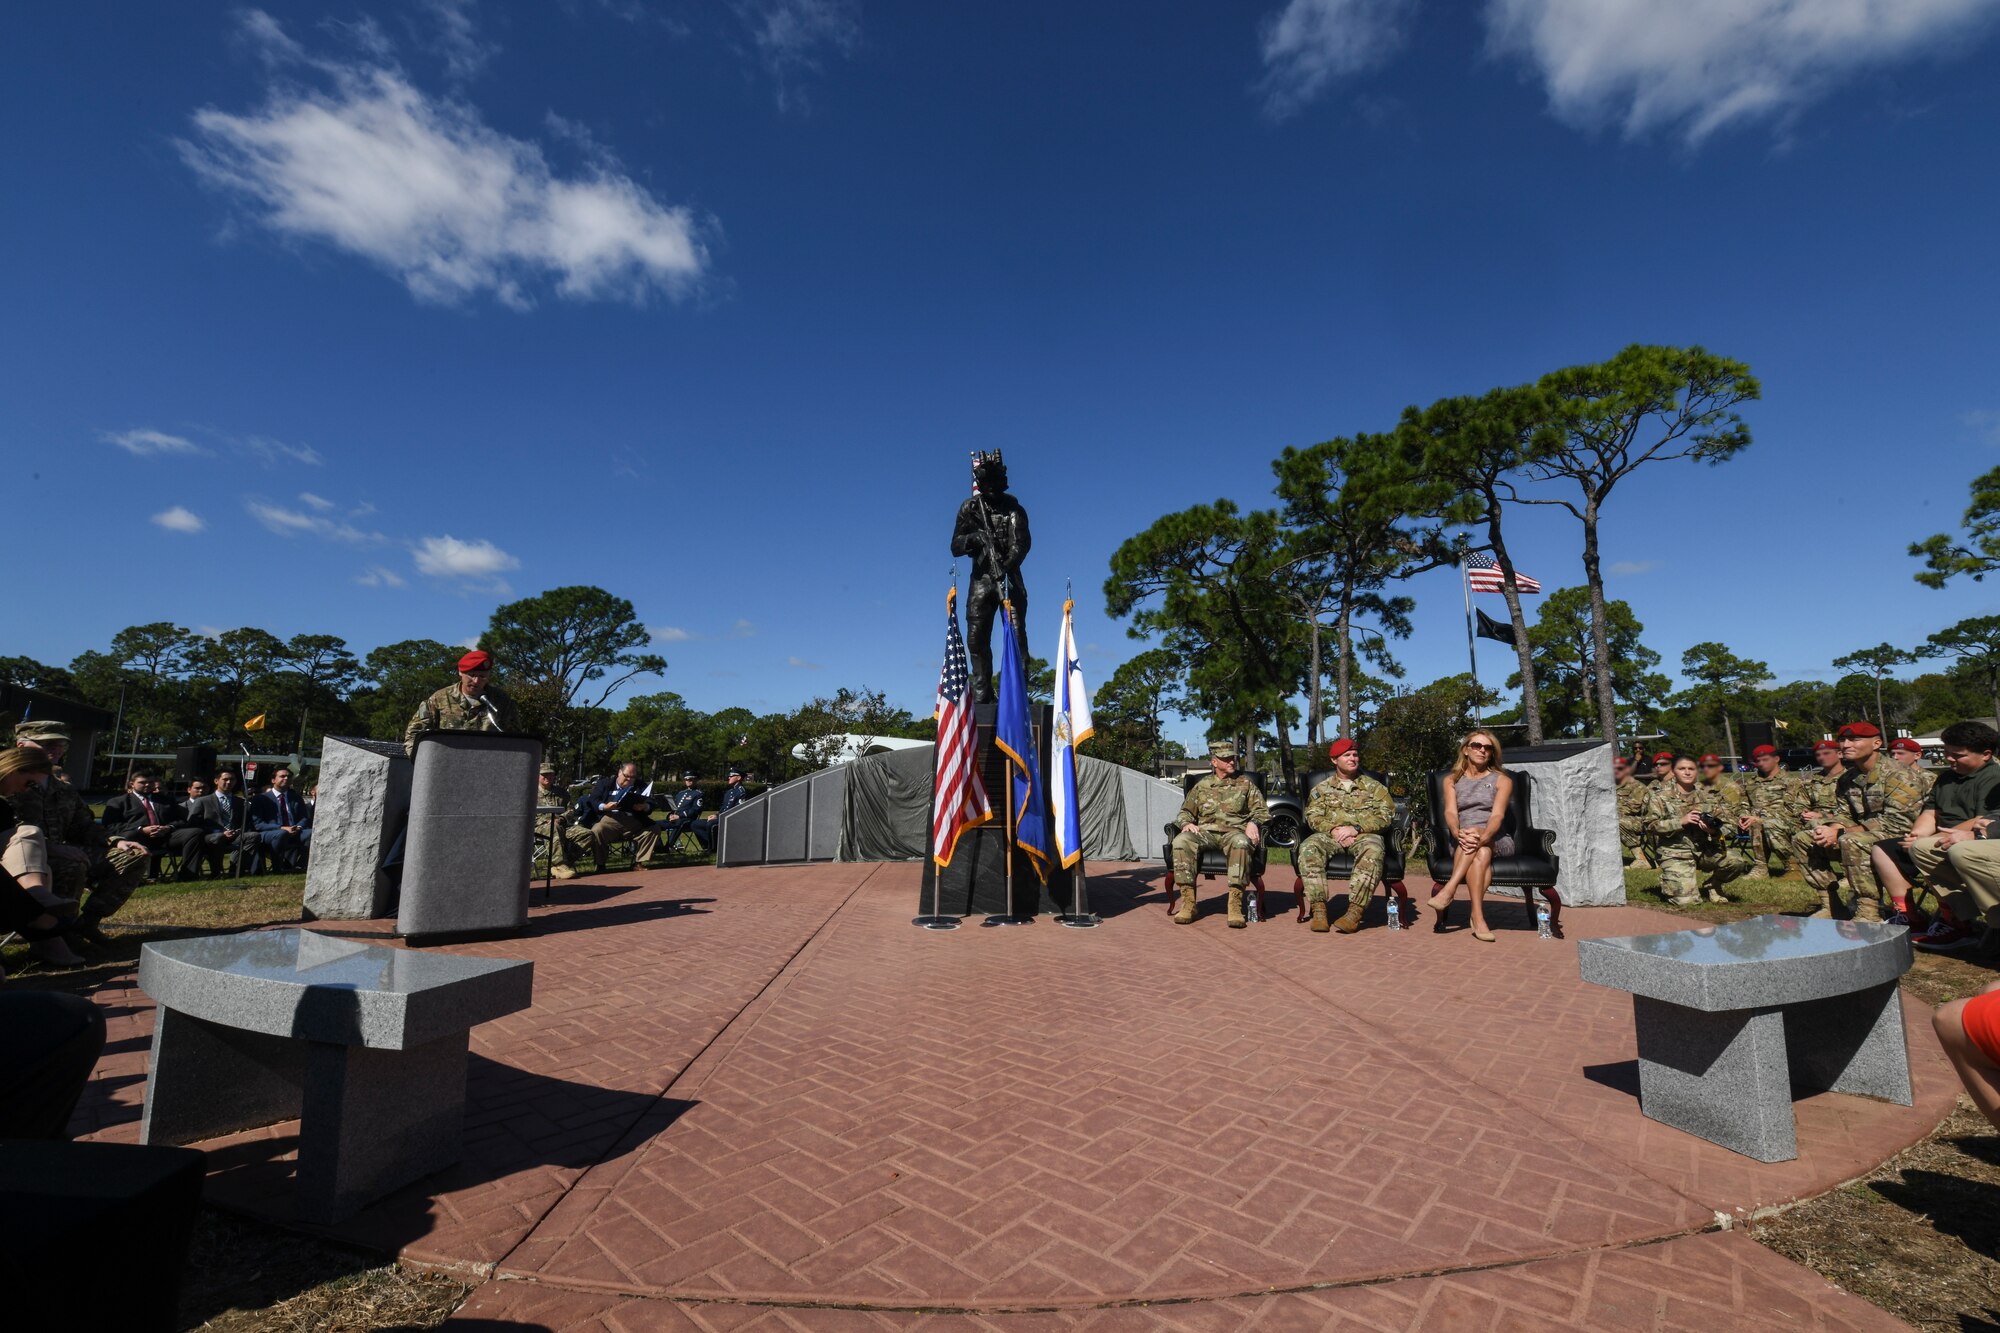 U.S. Air Force Col. Spence Cocanour, vice commander of the 24th Special Operations Wing, speaks during the U.S. Air Force Master Sgt. John A. Chapman Medal of Honor memorial unveiling ceremony on Oct. 27, 2018, at Hurlburt Field, Florida.